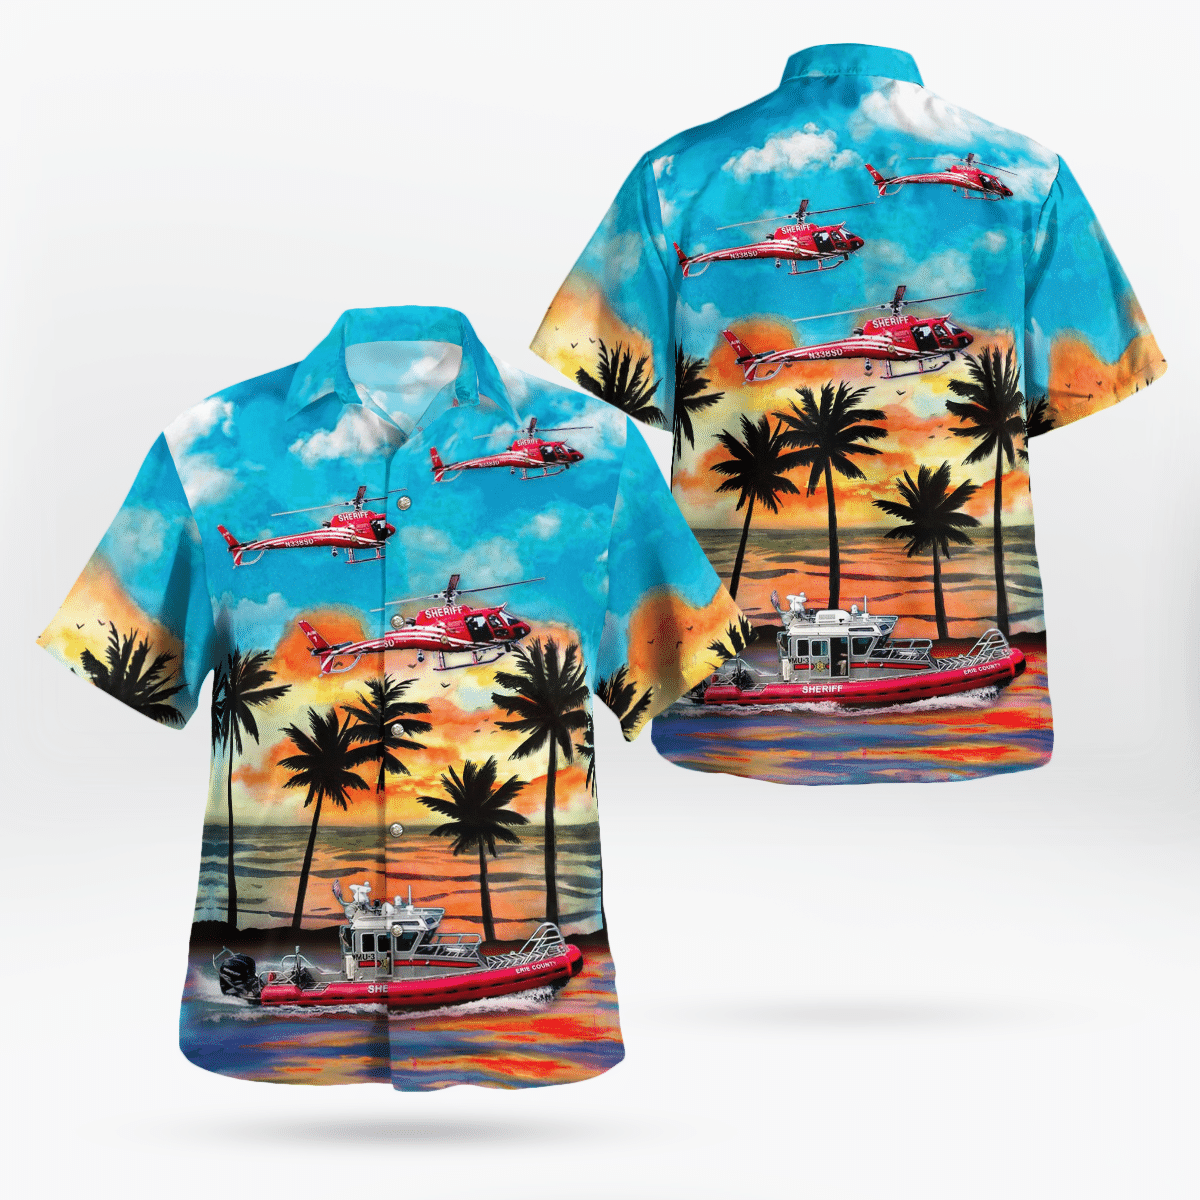 Do you want to be the coolest person on the beach? 239